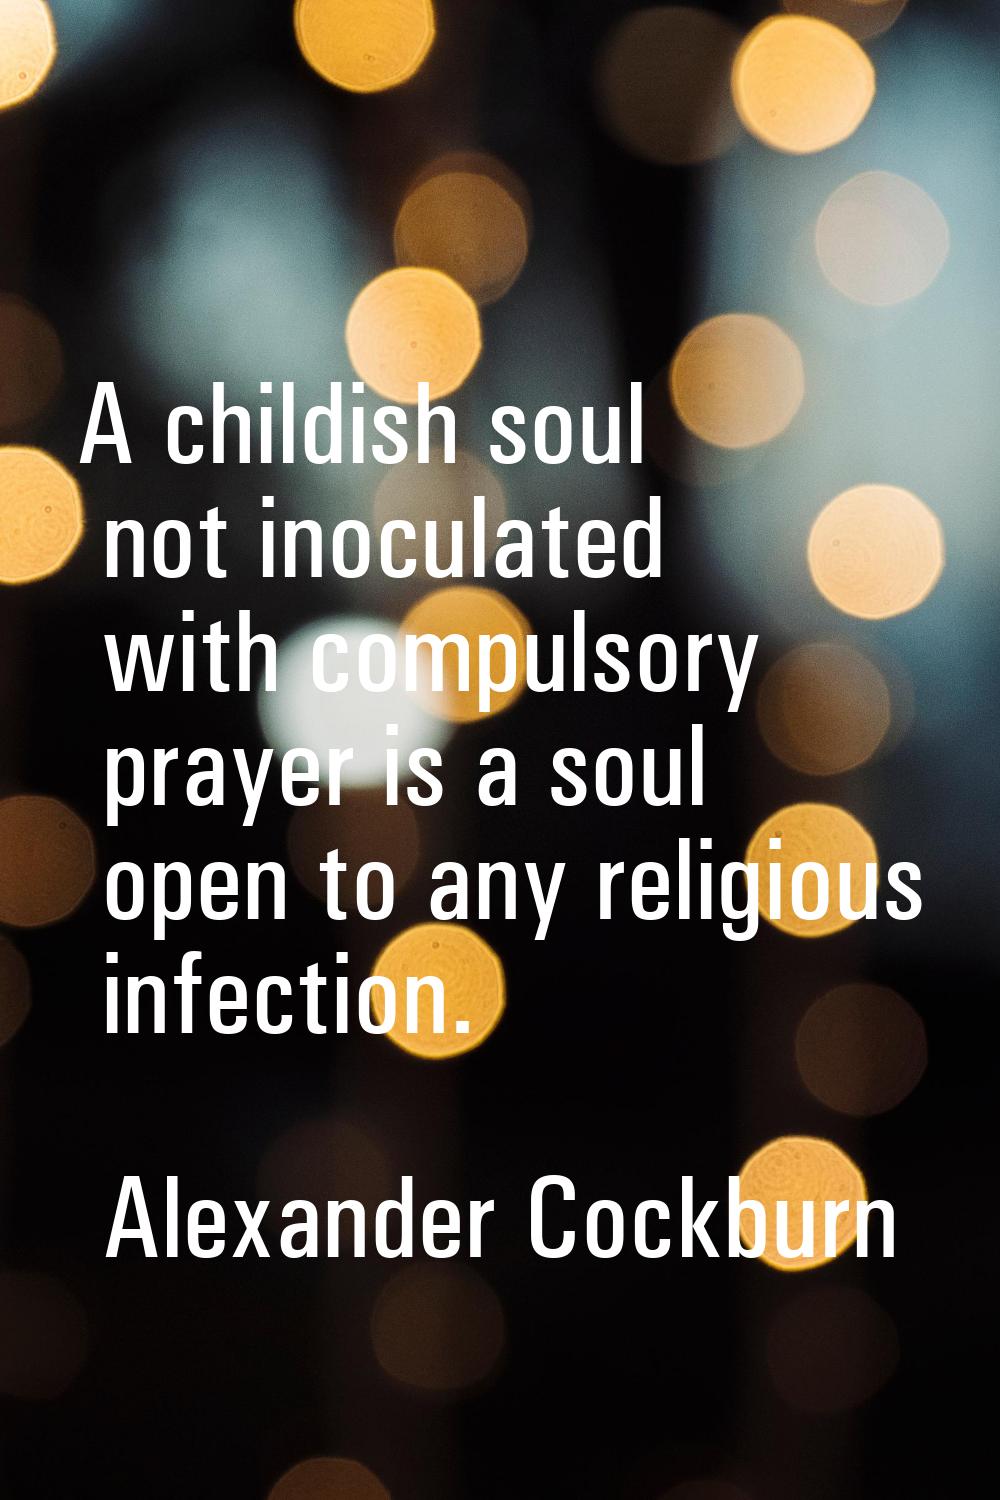 A childish soul not inoculated with compulsory prayer is a soul open to any religious infection.